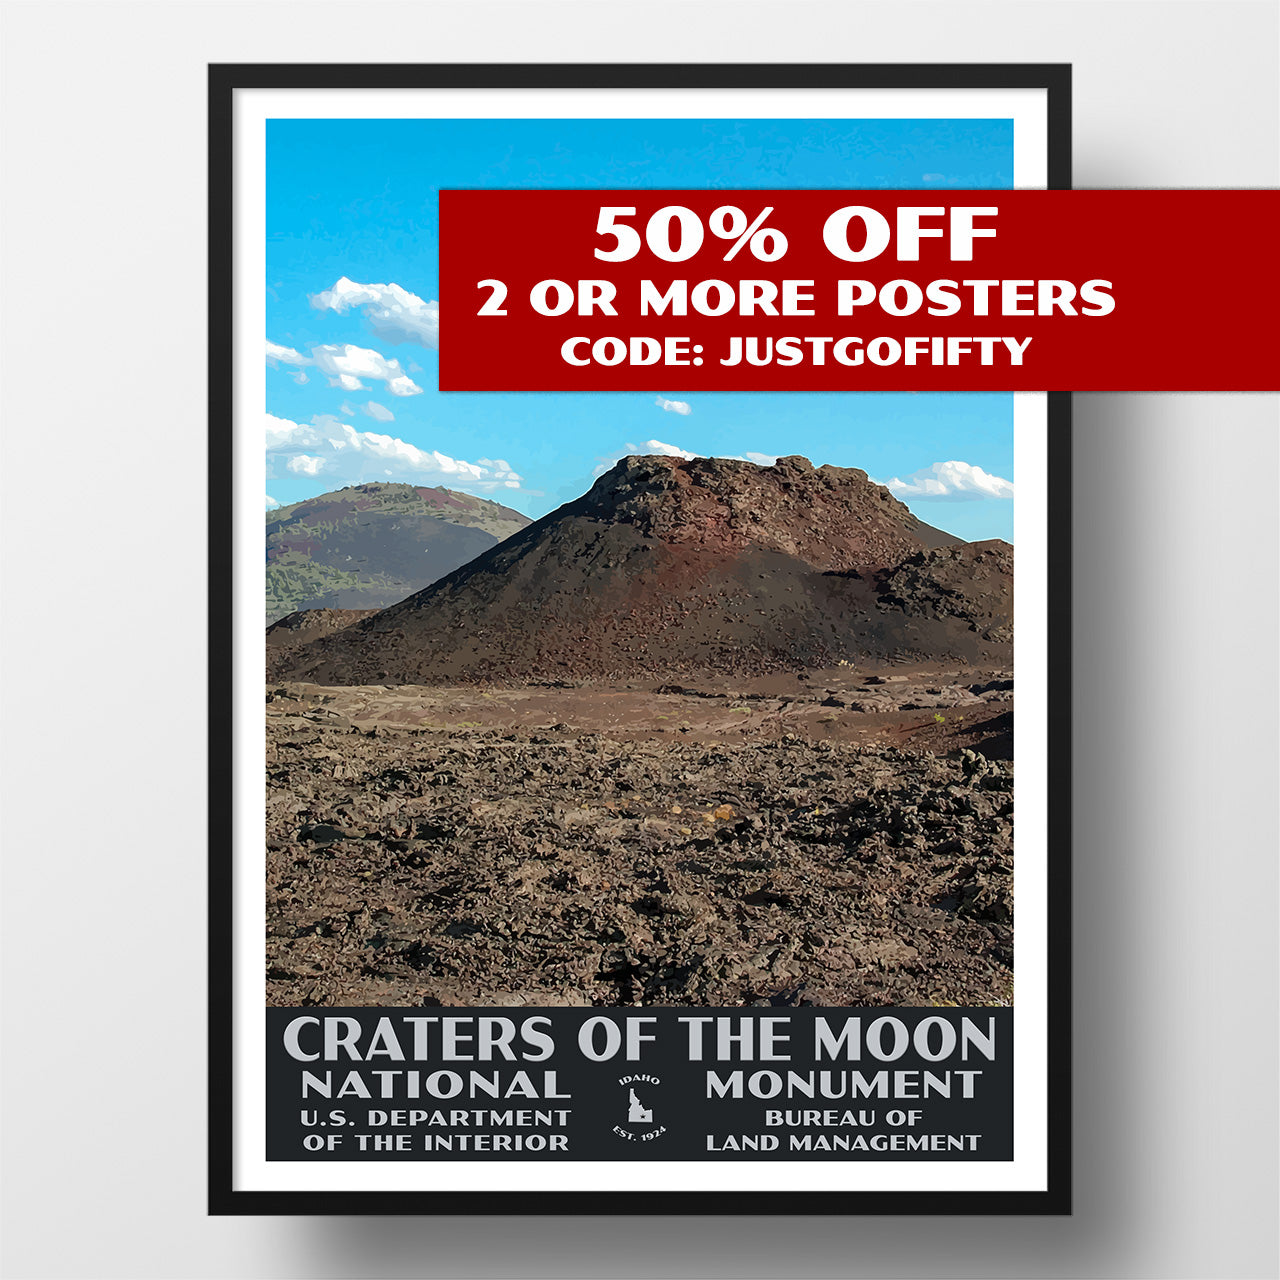 Craters of the Moon National Monument poster